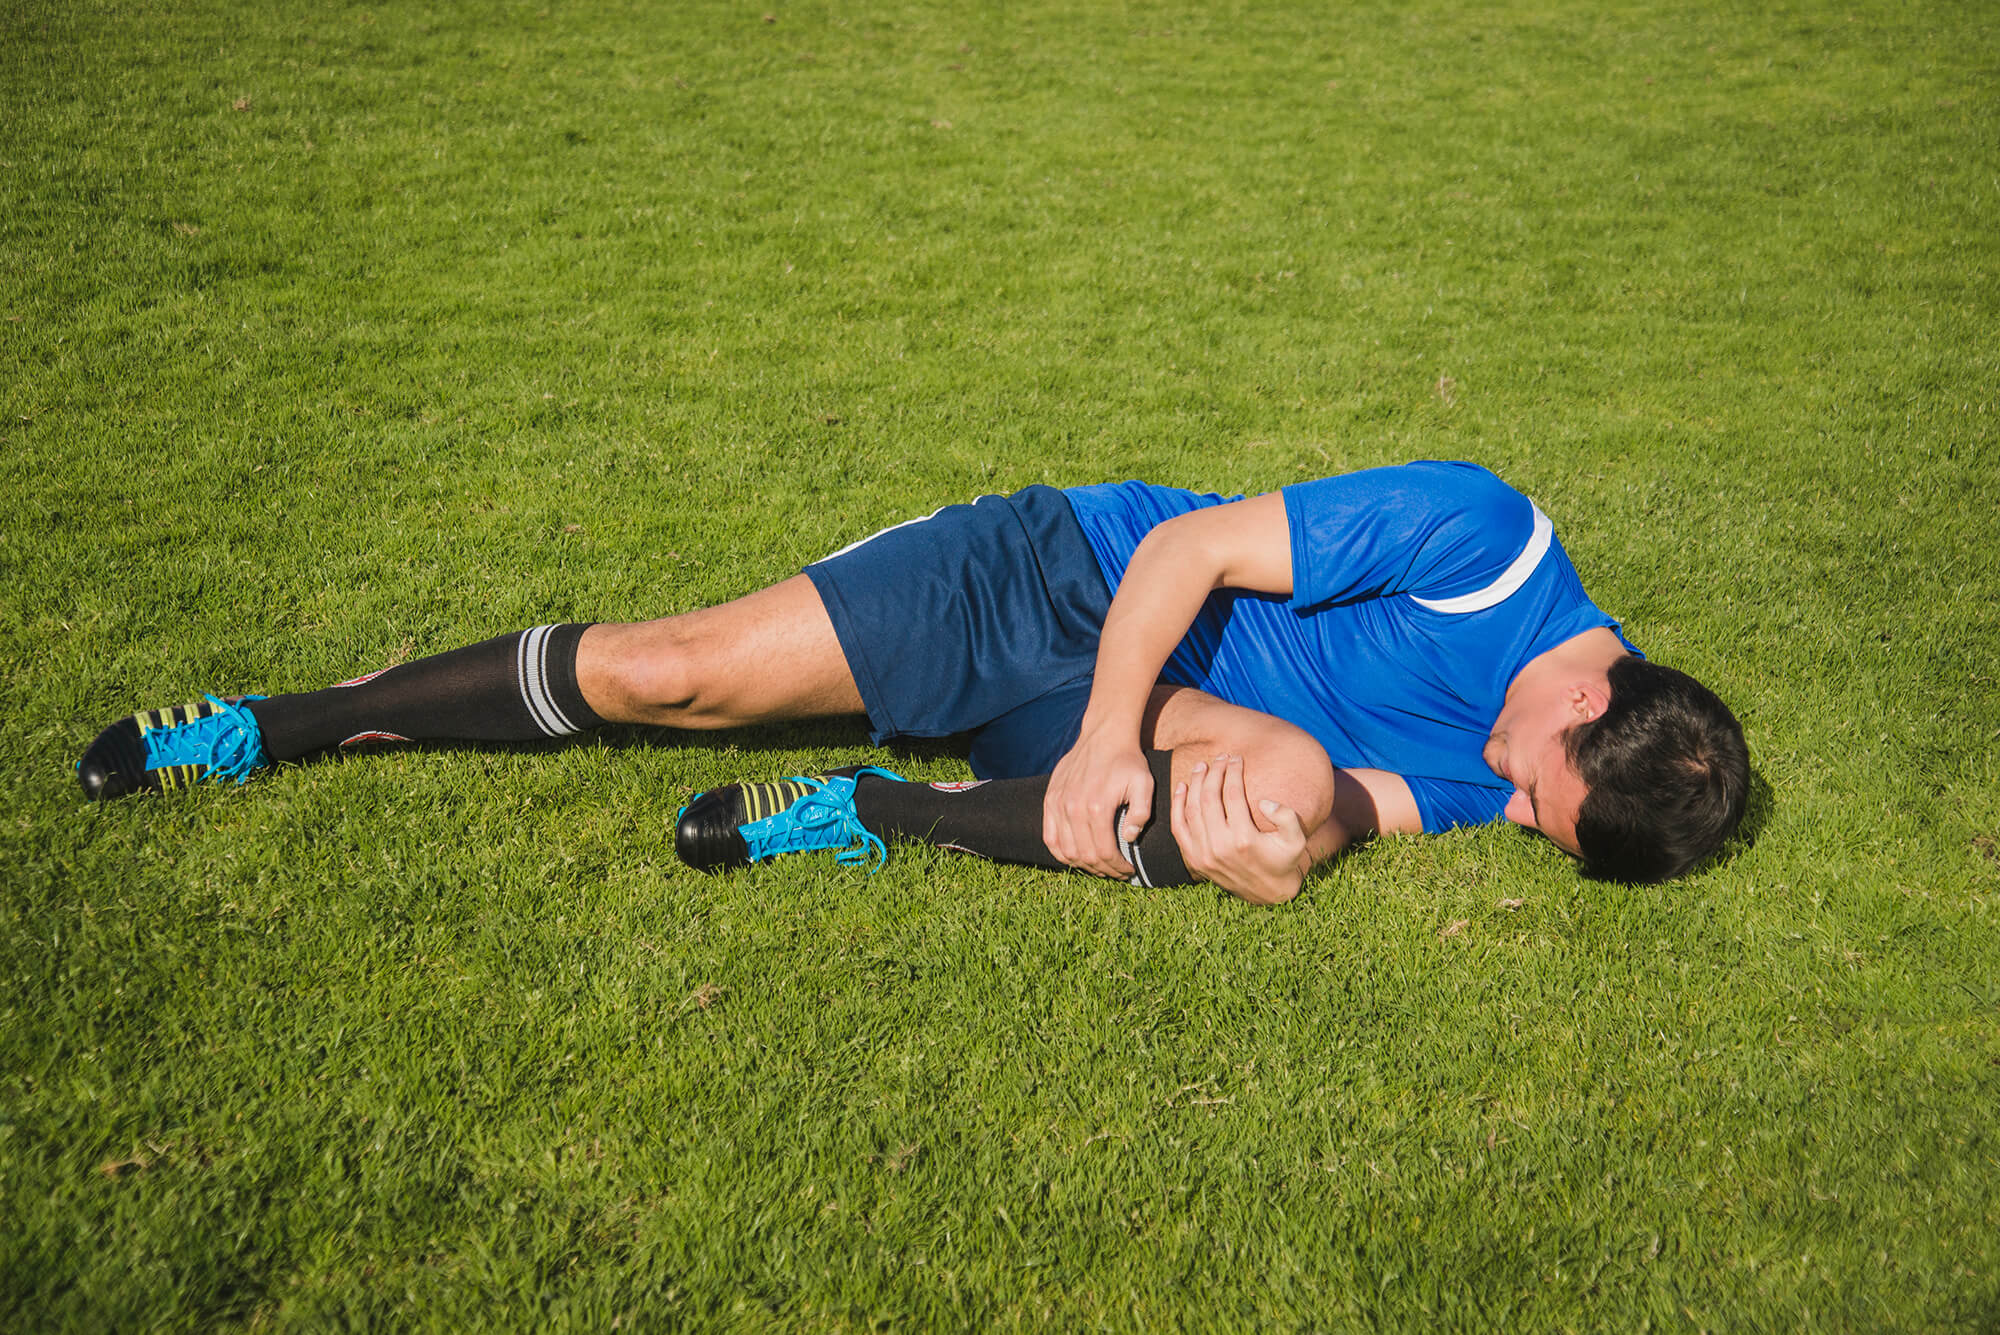 Injuries among Professional Soccer Players